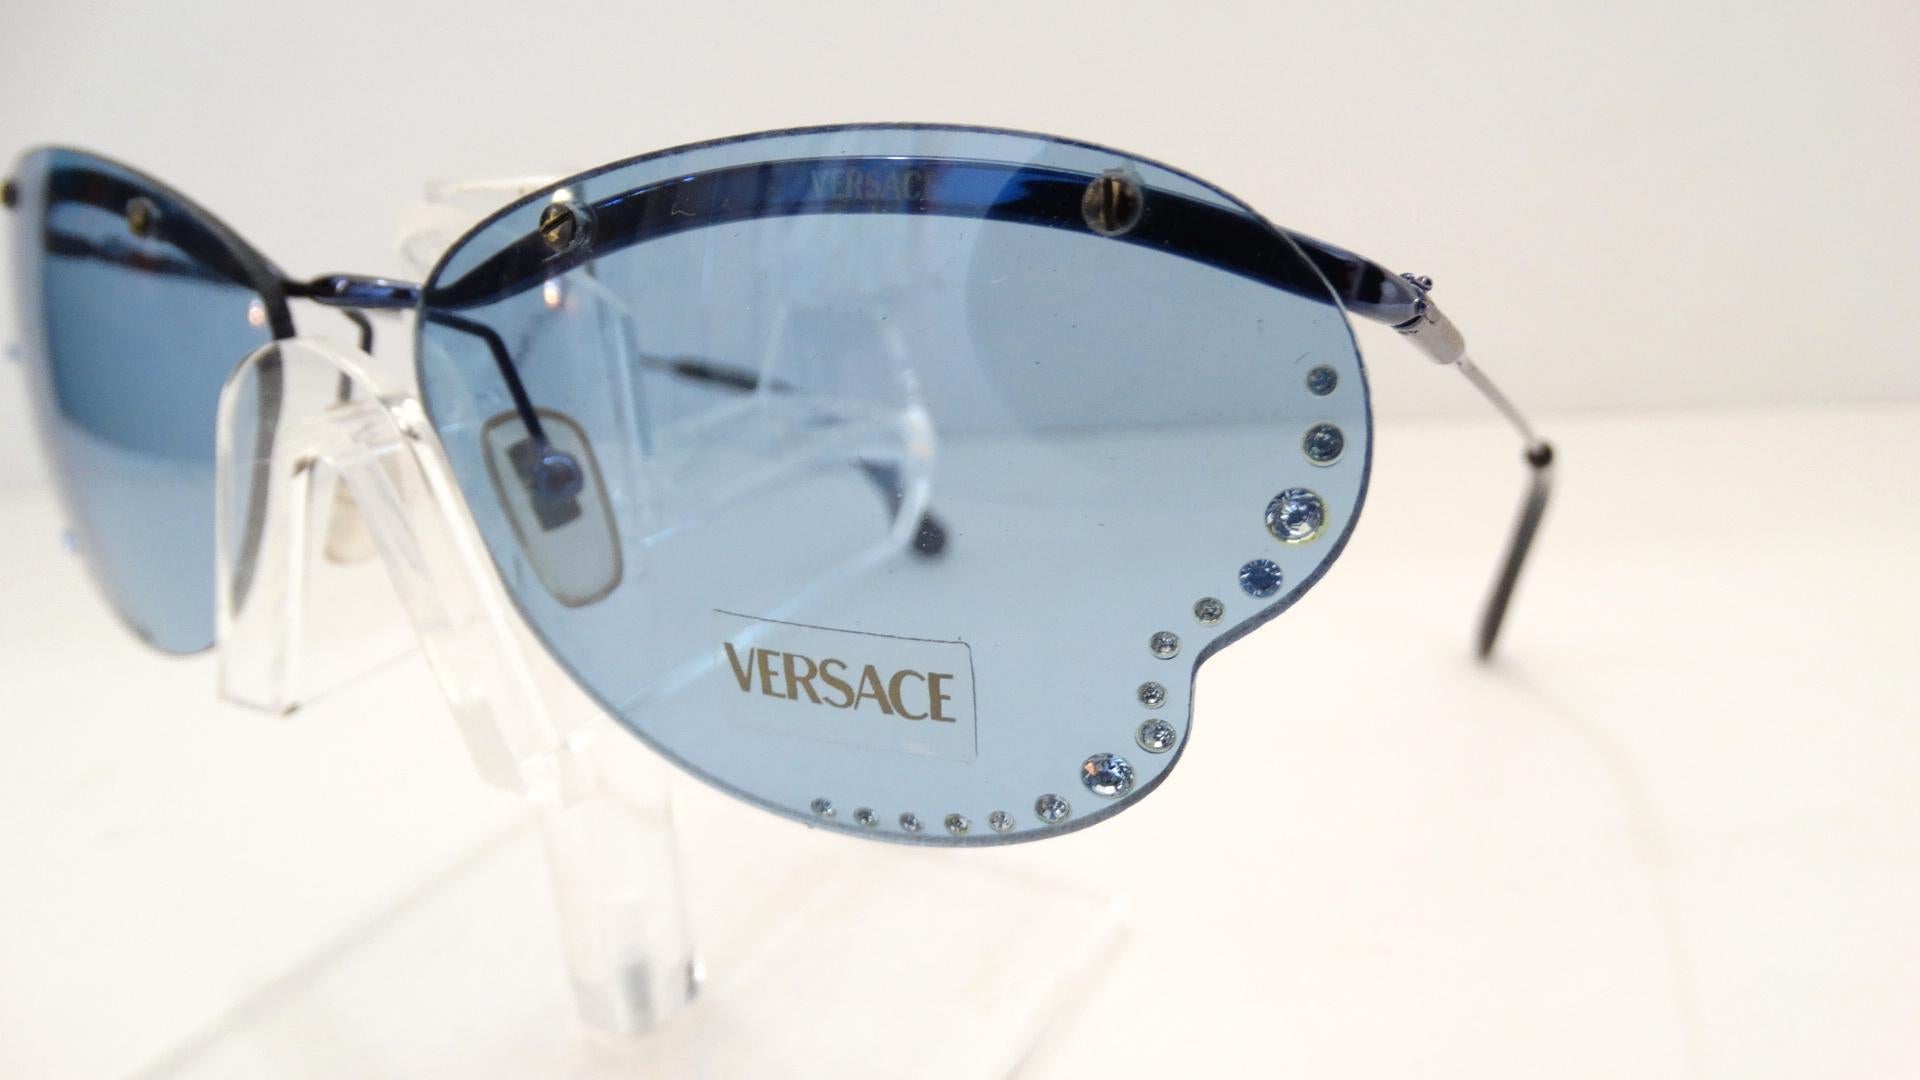 The Most Adorable Sunglasses Are Here! Circa 1990s, these dead stock Versace sunglasses feature rimless butterfly wing shaped lenses and tonal blue metal arms. Clear blue lenses are embellished with blue rhinestones. The perfect accent glasses that